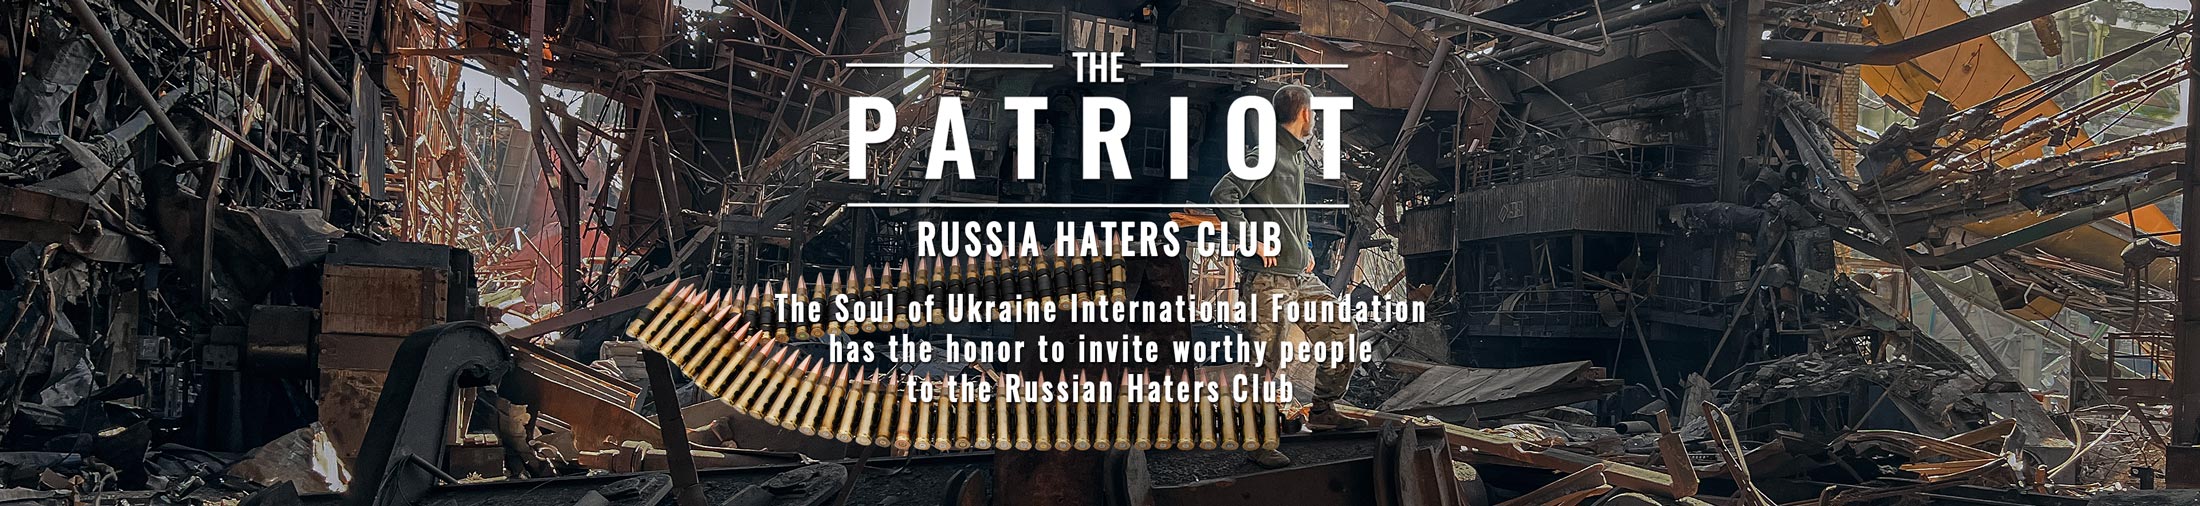 The Soul of Ukraine International Foundation has the honor to invite worthy people to the Russian Haters Club.